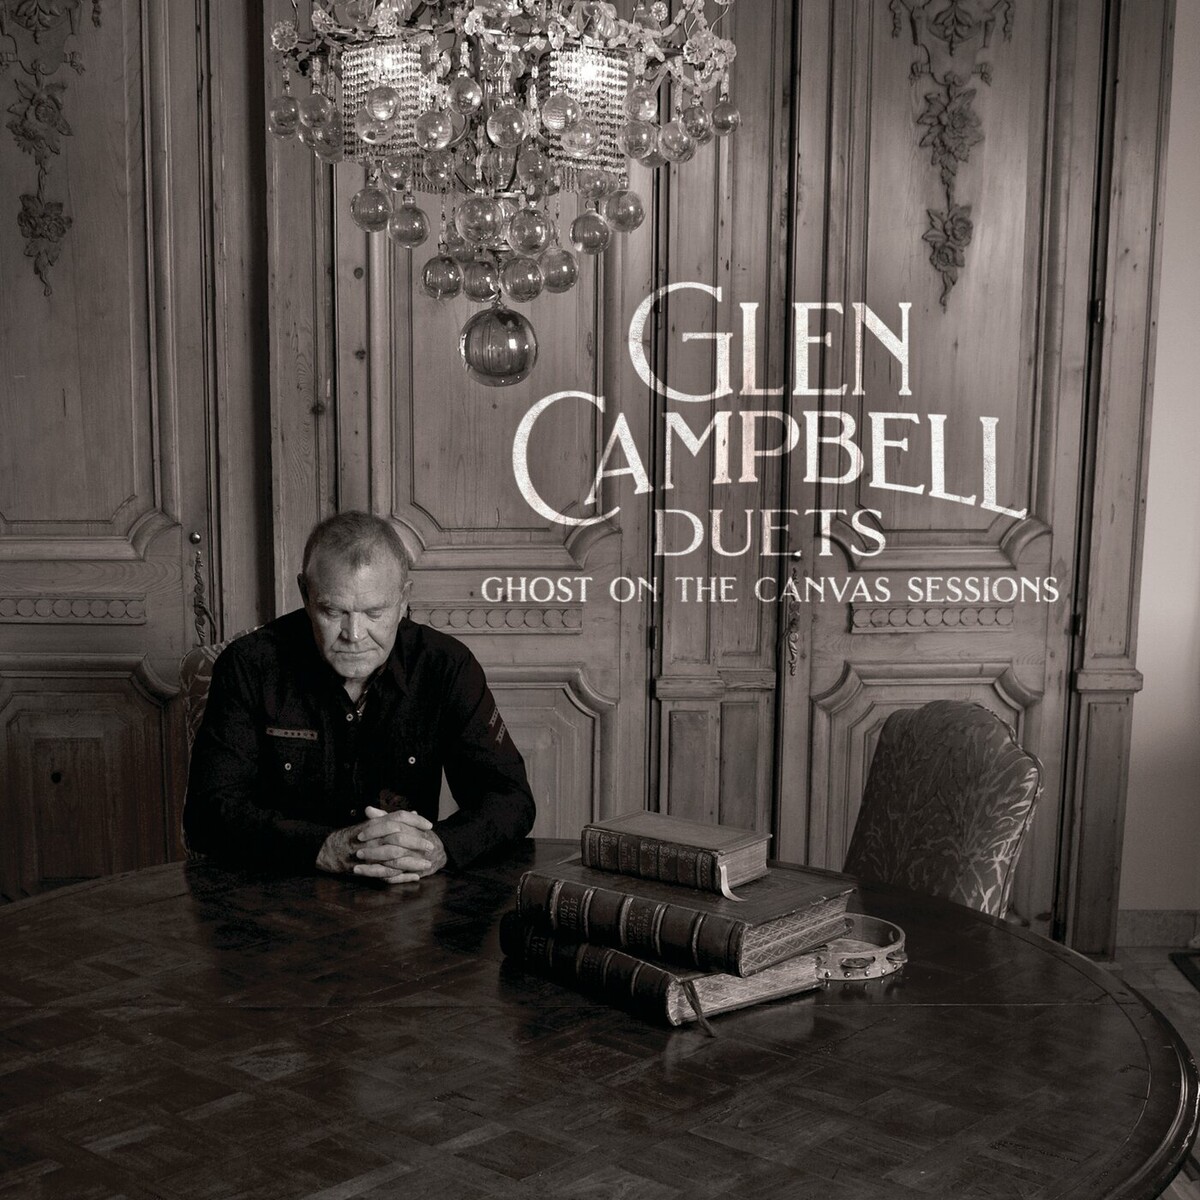 Glen Campbell - Glen Campbell Duets Ghost On The Canvas Sessions